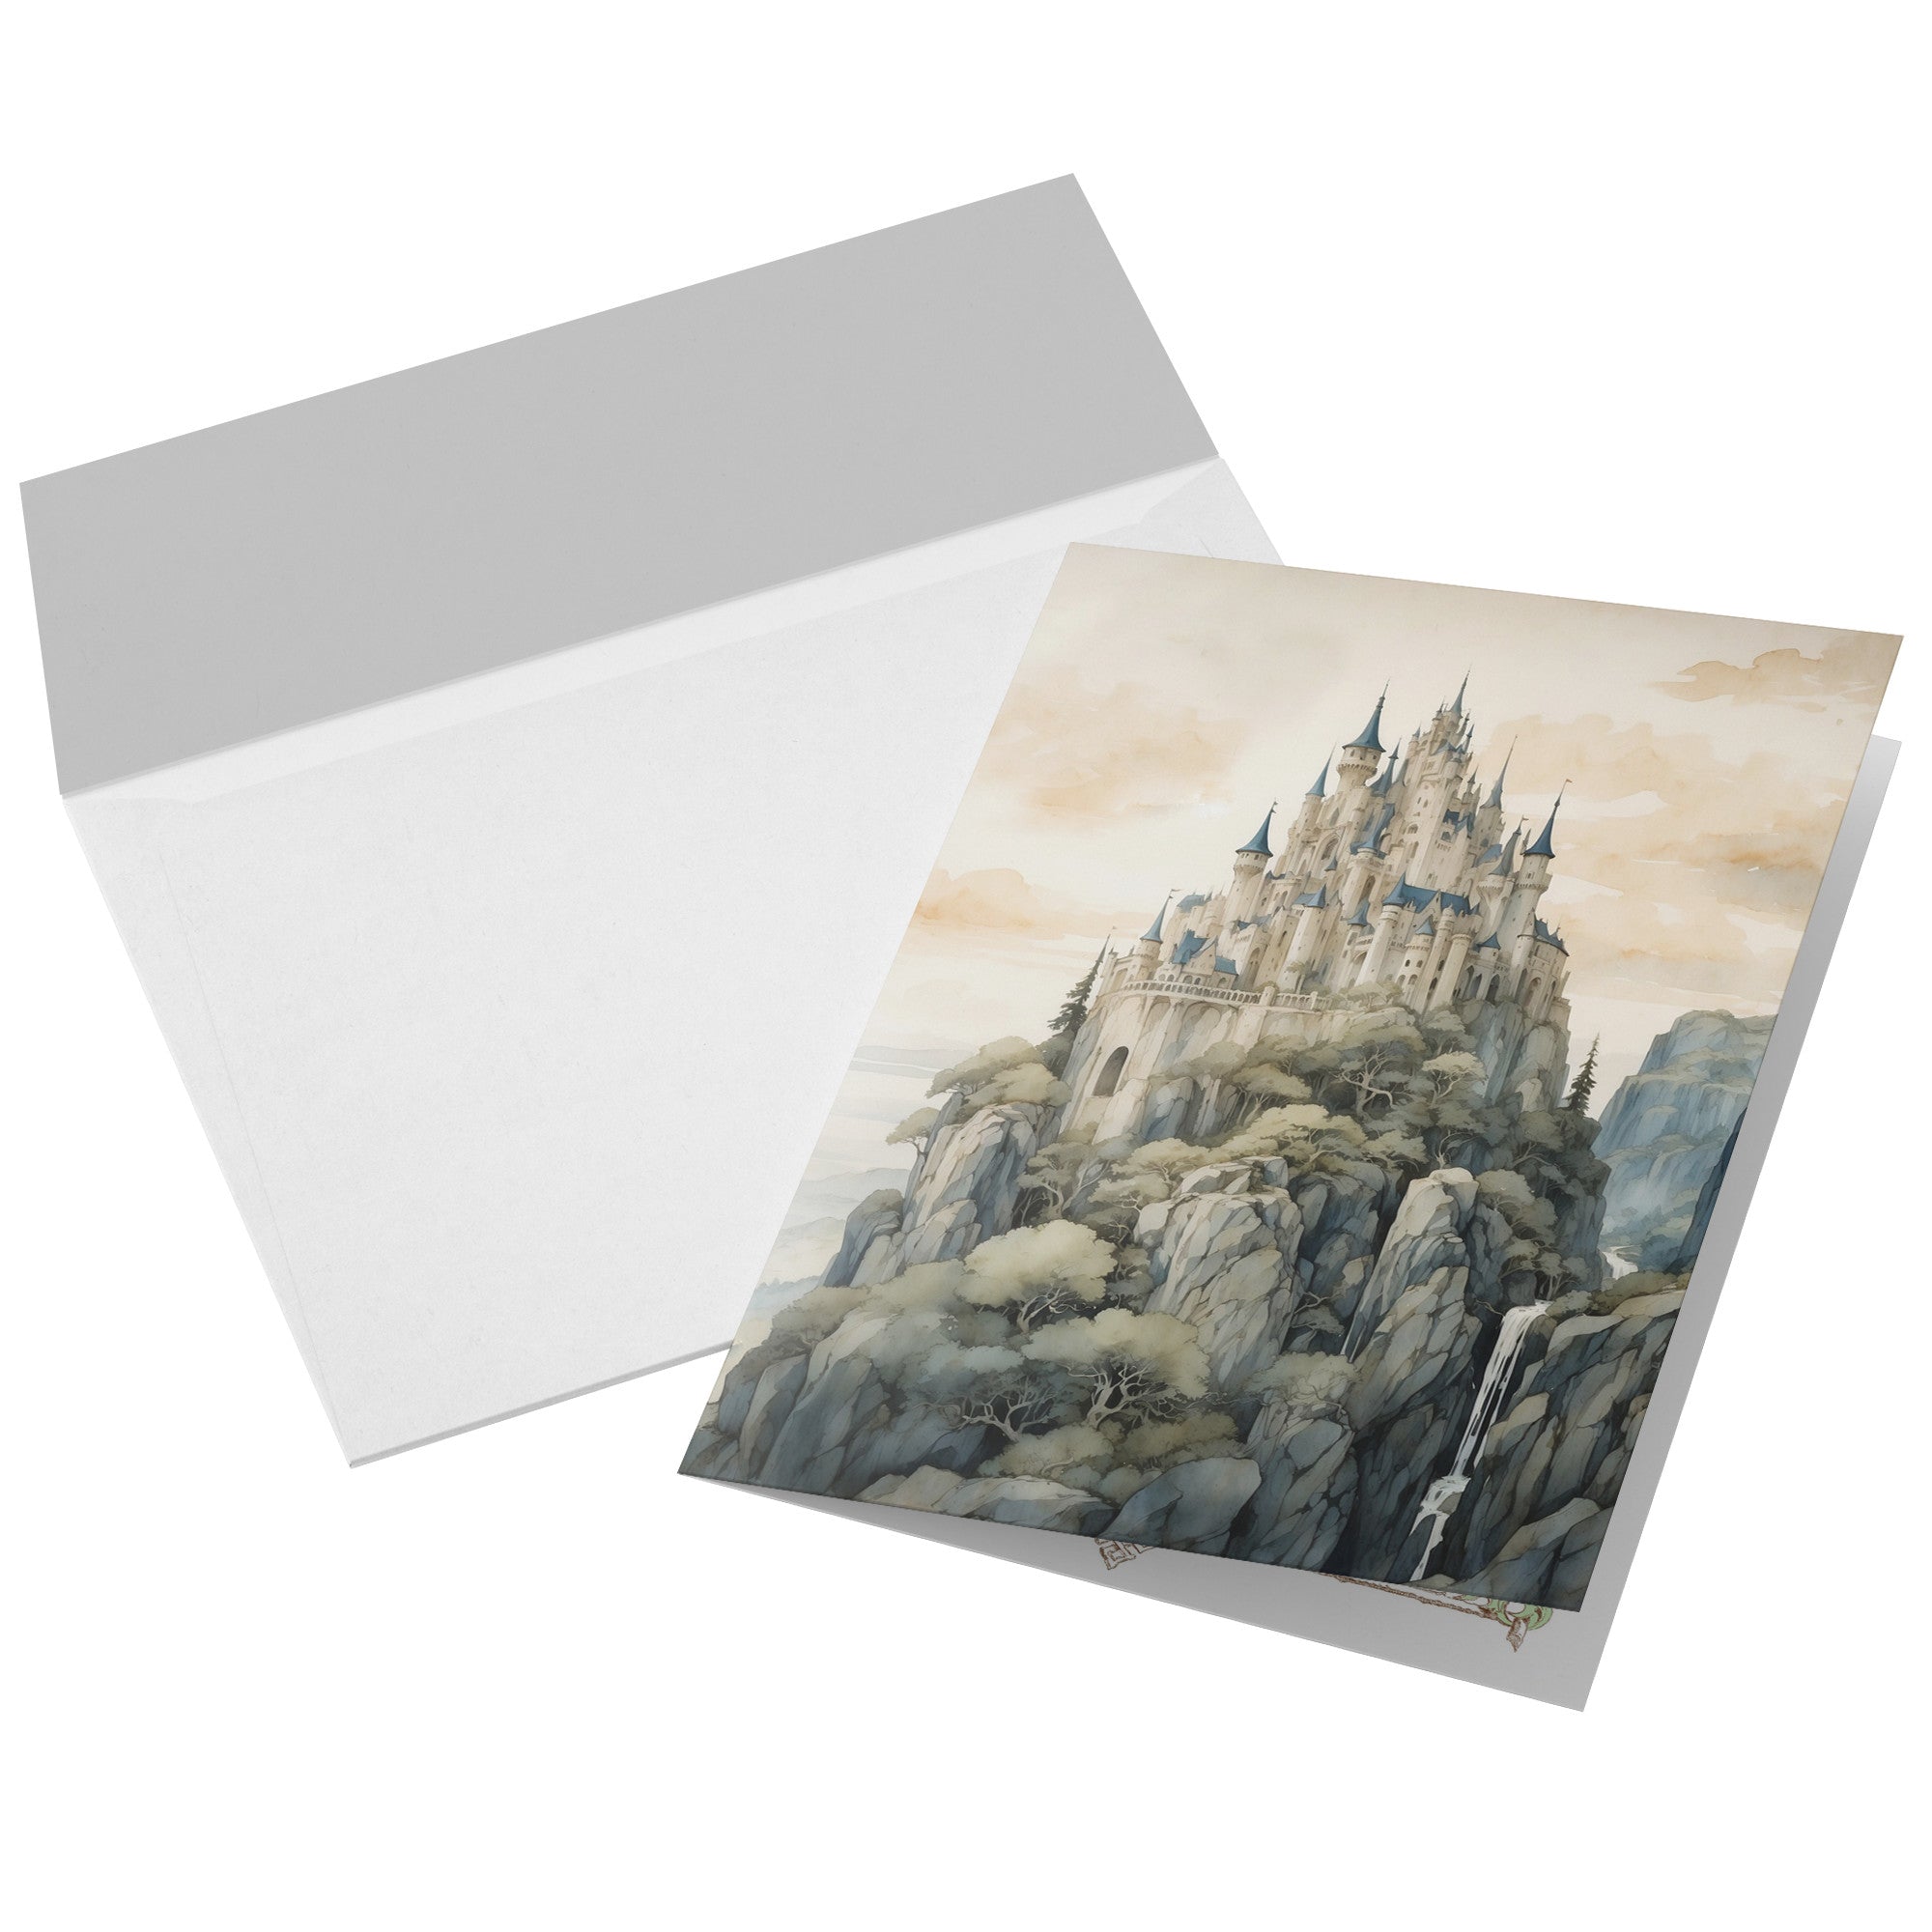 Fairytale Castle, Set of Greeting Cards/Notecards, With White Envelopes, 5in x 7in